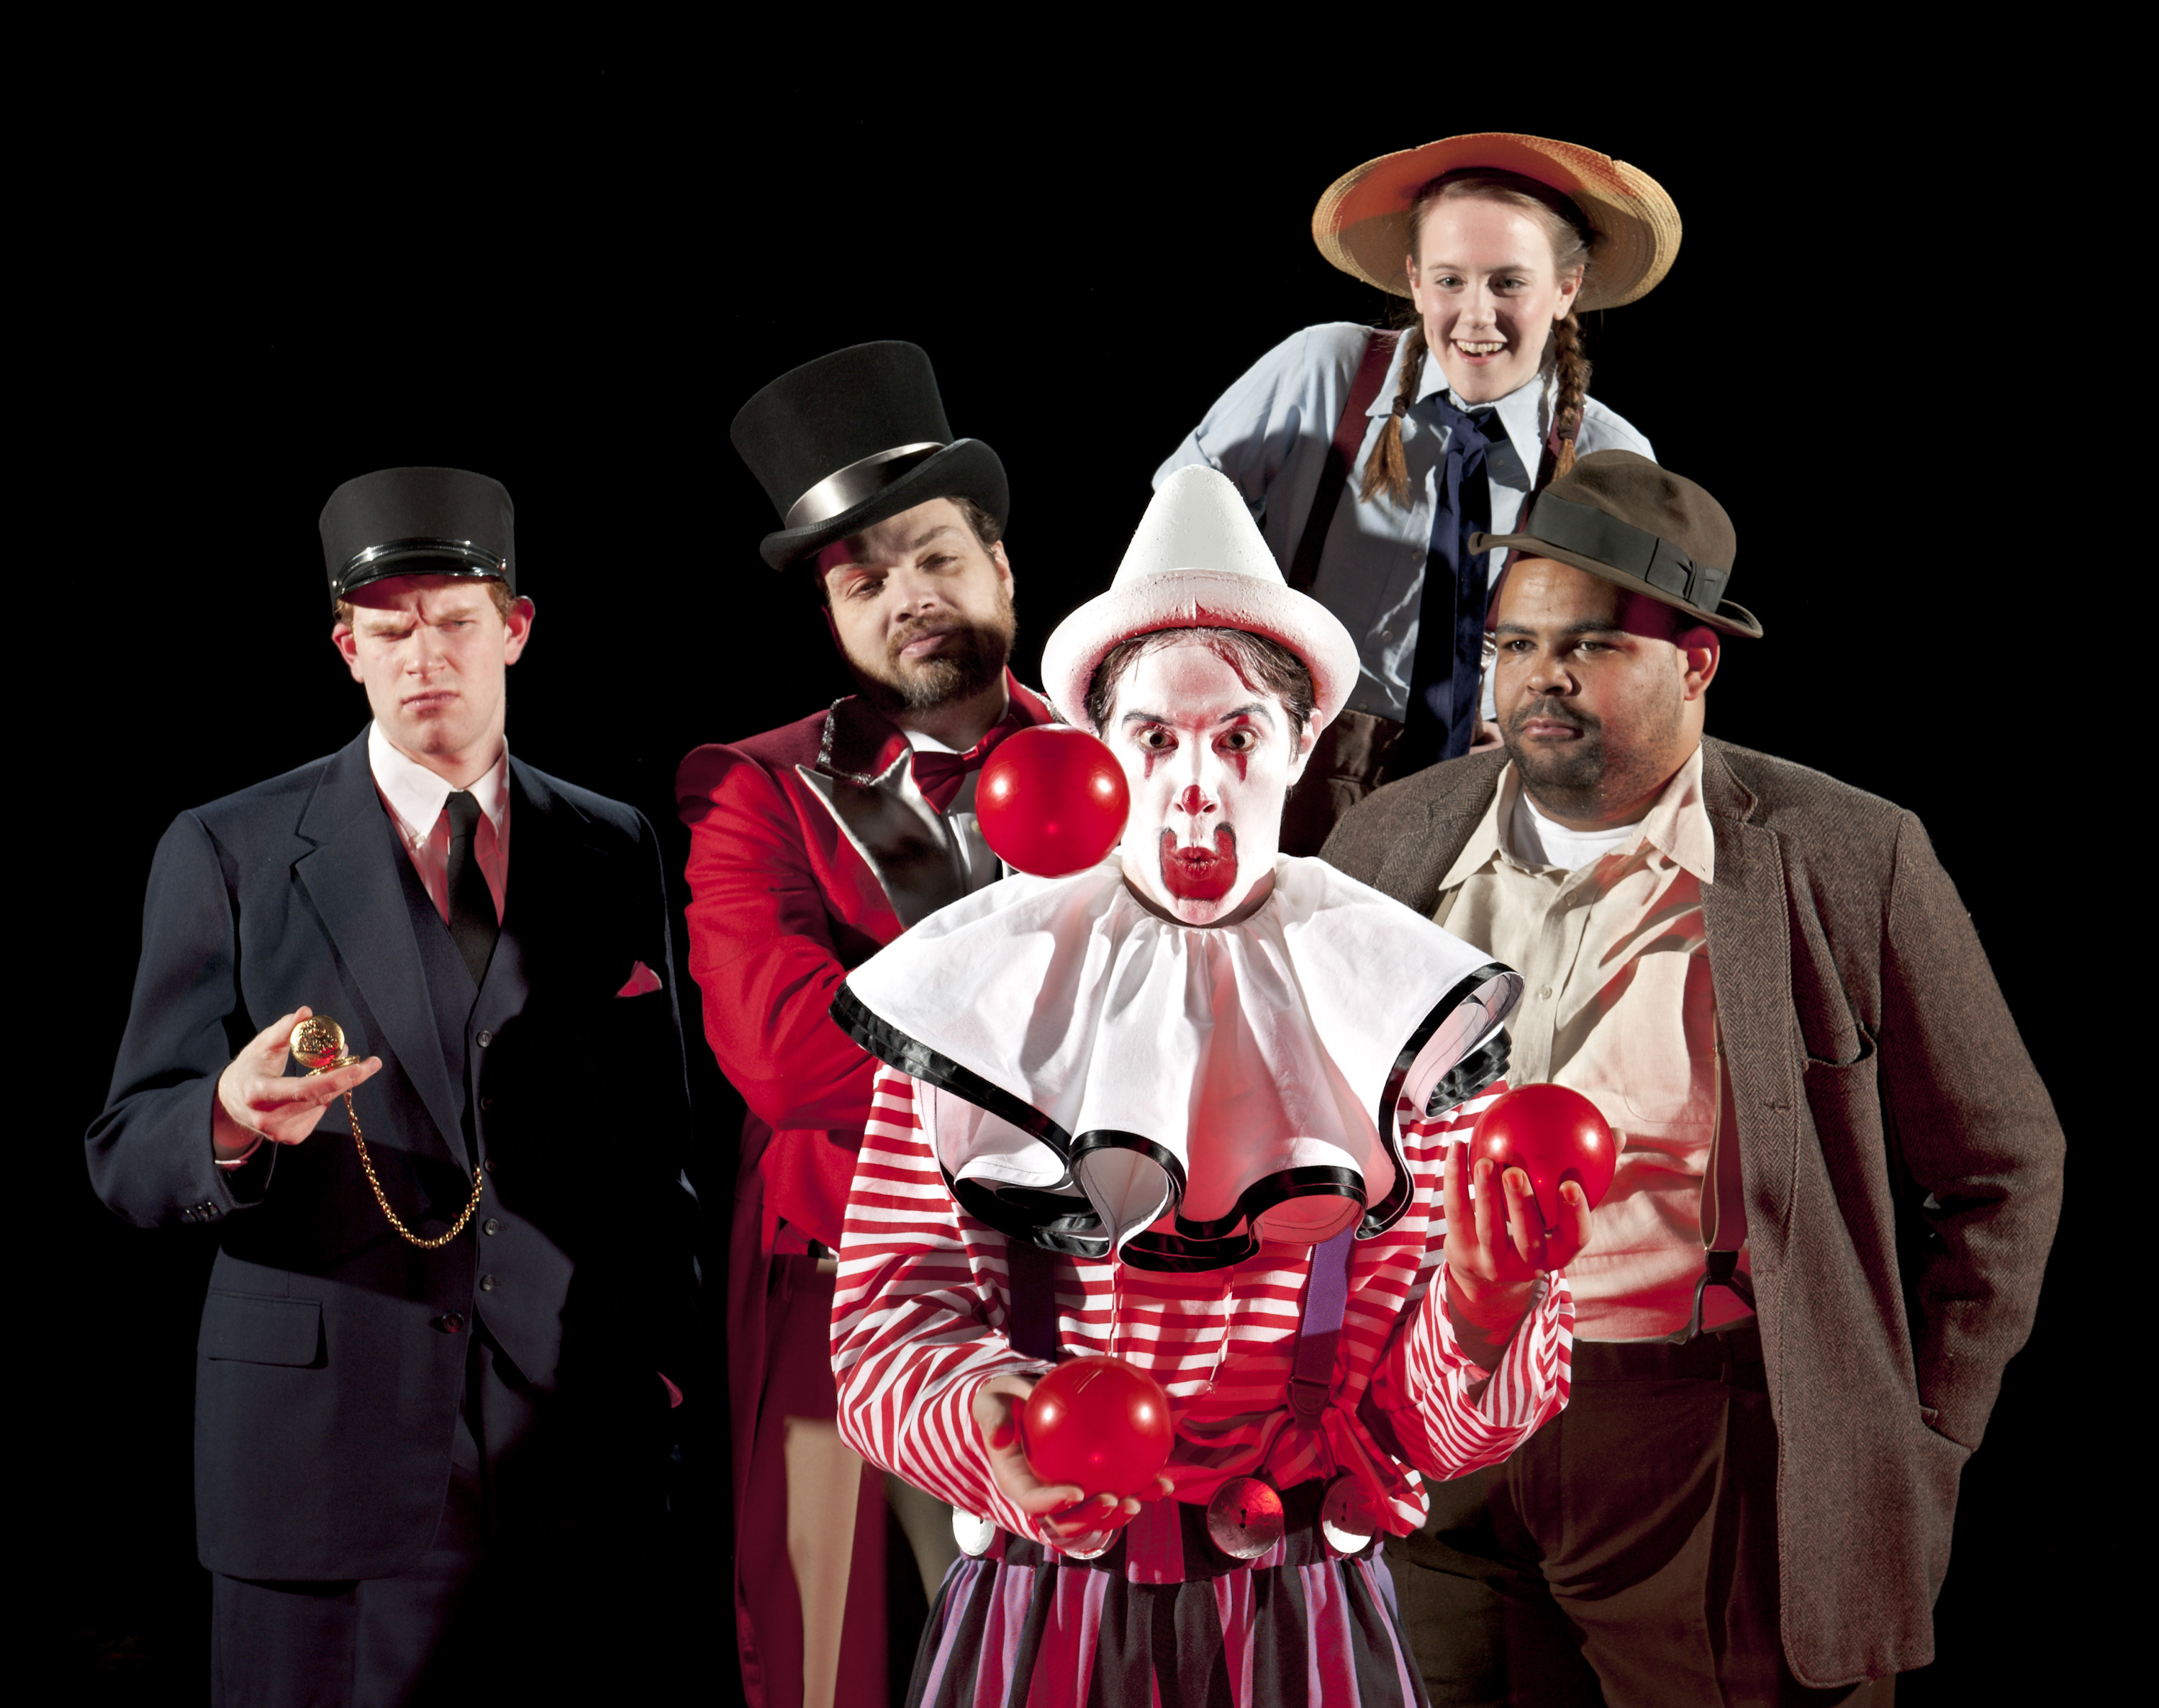 Engineer (Daniel Prillaman), Ringmaster (Jay Colligan) and Townspeople (Julia Addis and Christopher Murray) look on as the Circus Clown (Michael Goldstein) juggles